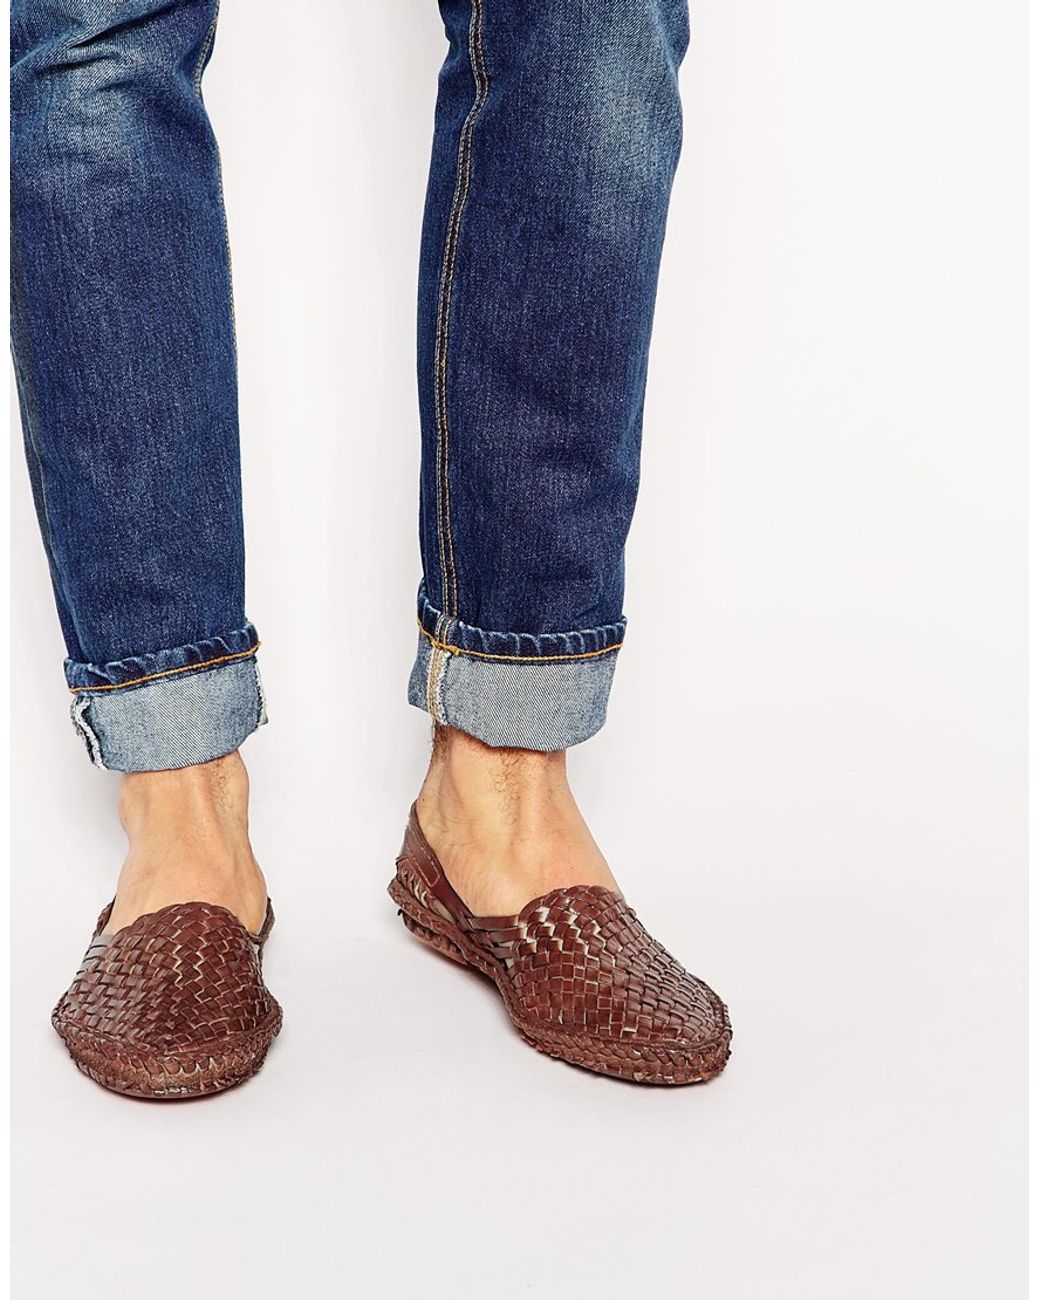 Page 8 - Cheap Men's Trainers, Shoes & Boots | ASOS Outlet